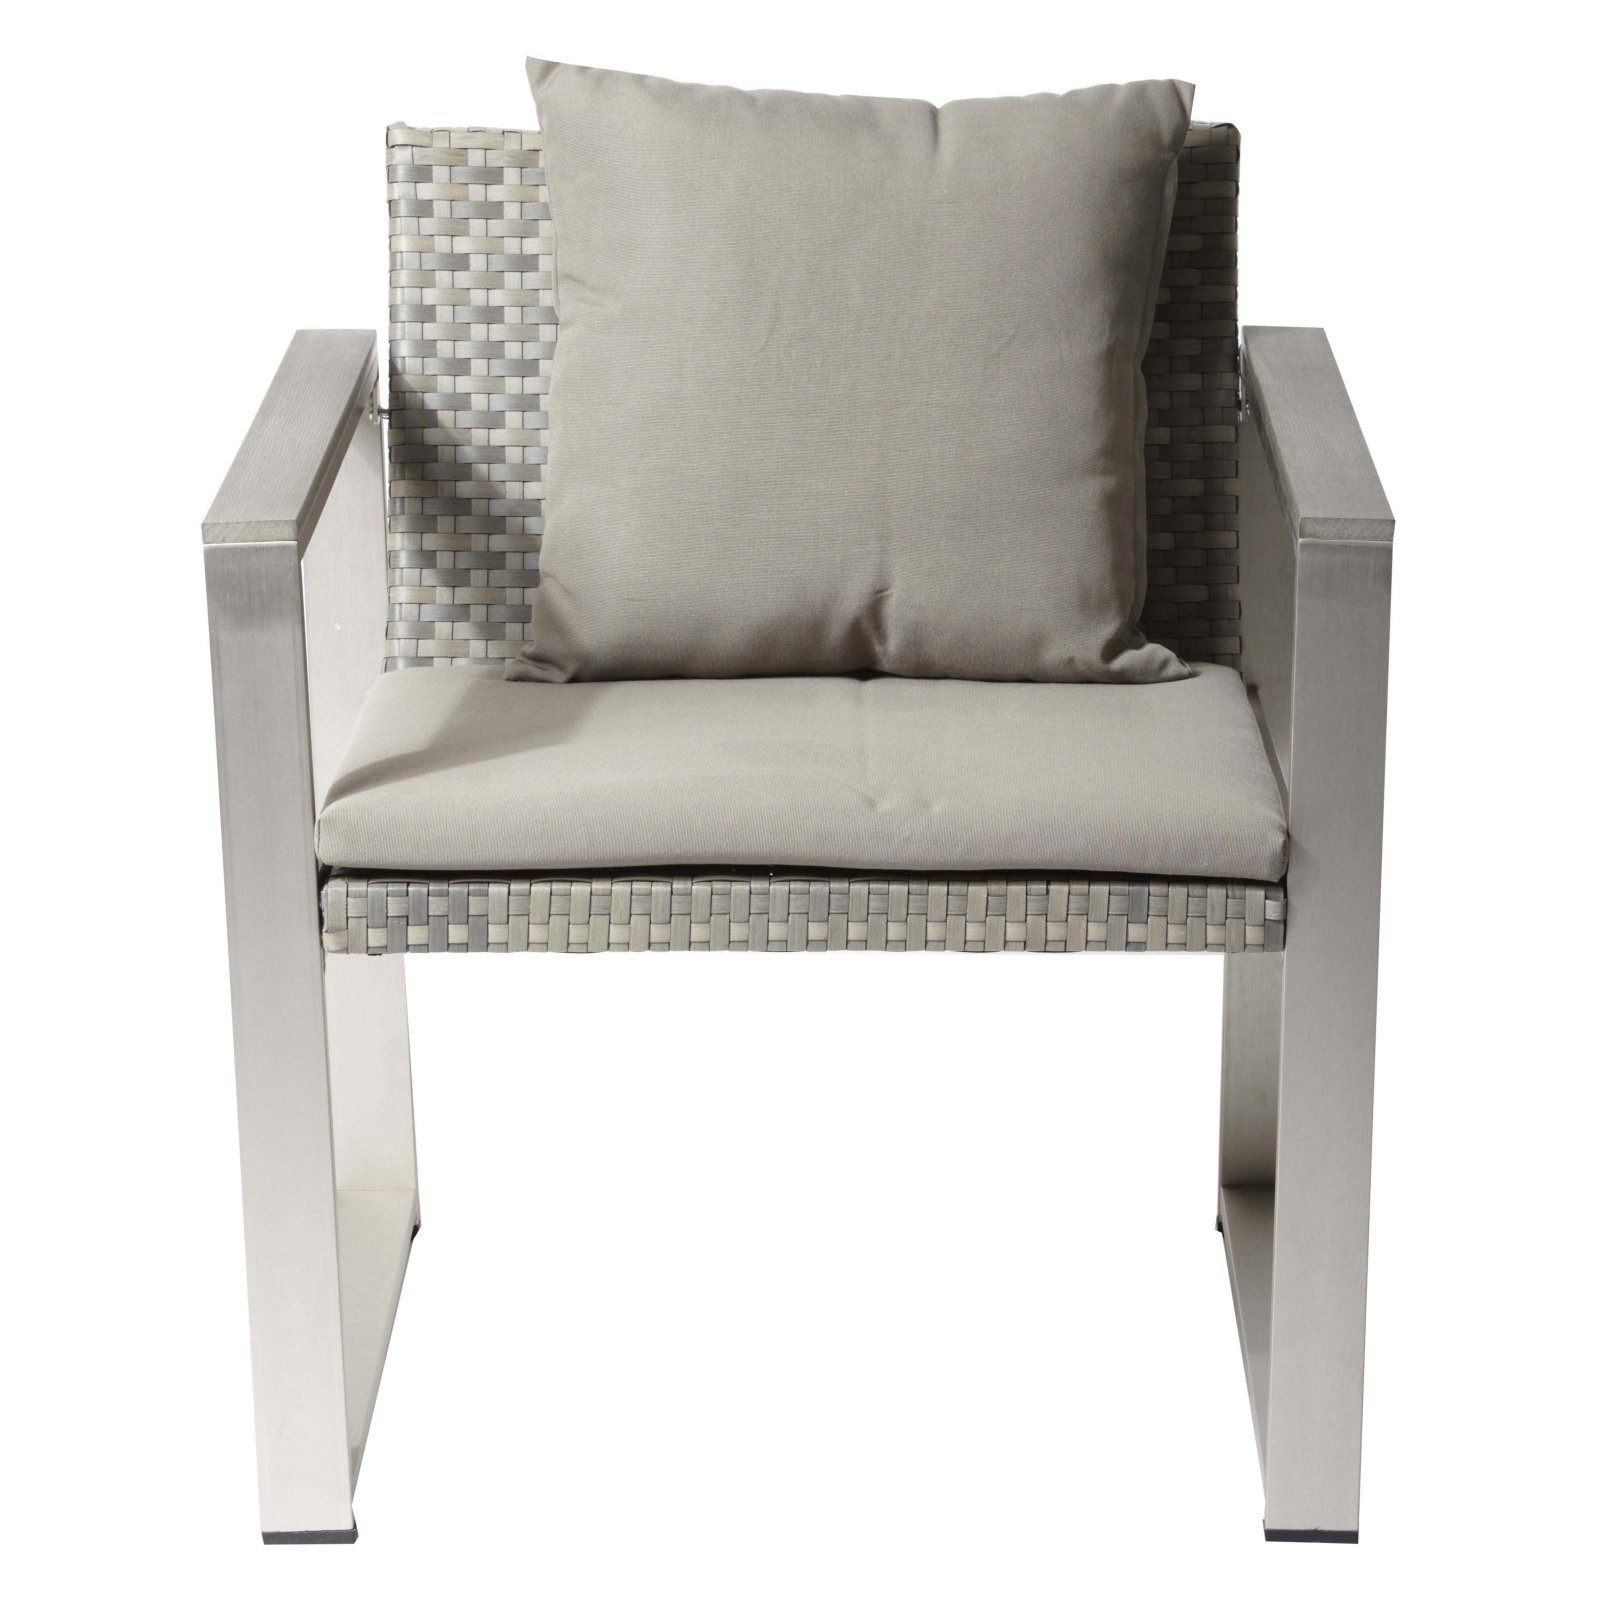 Pangea Home Chester Patio Lounge Chair - image 1 of 11